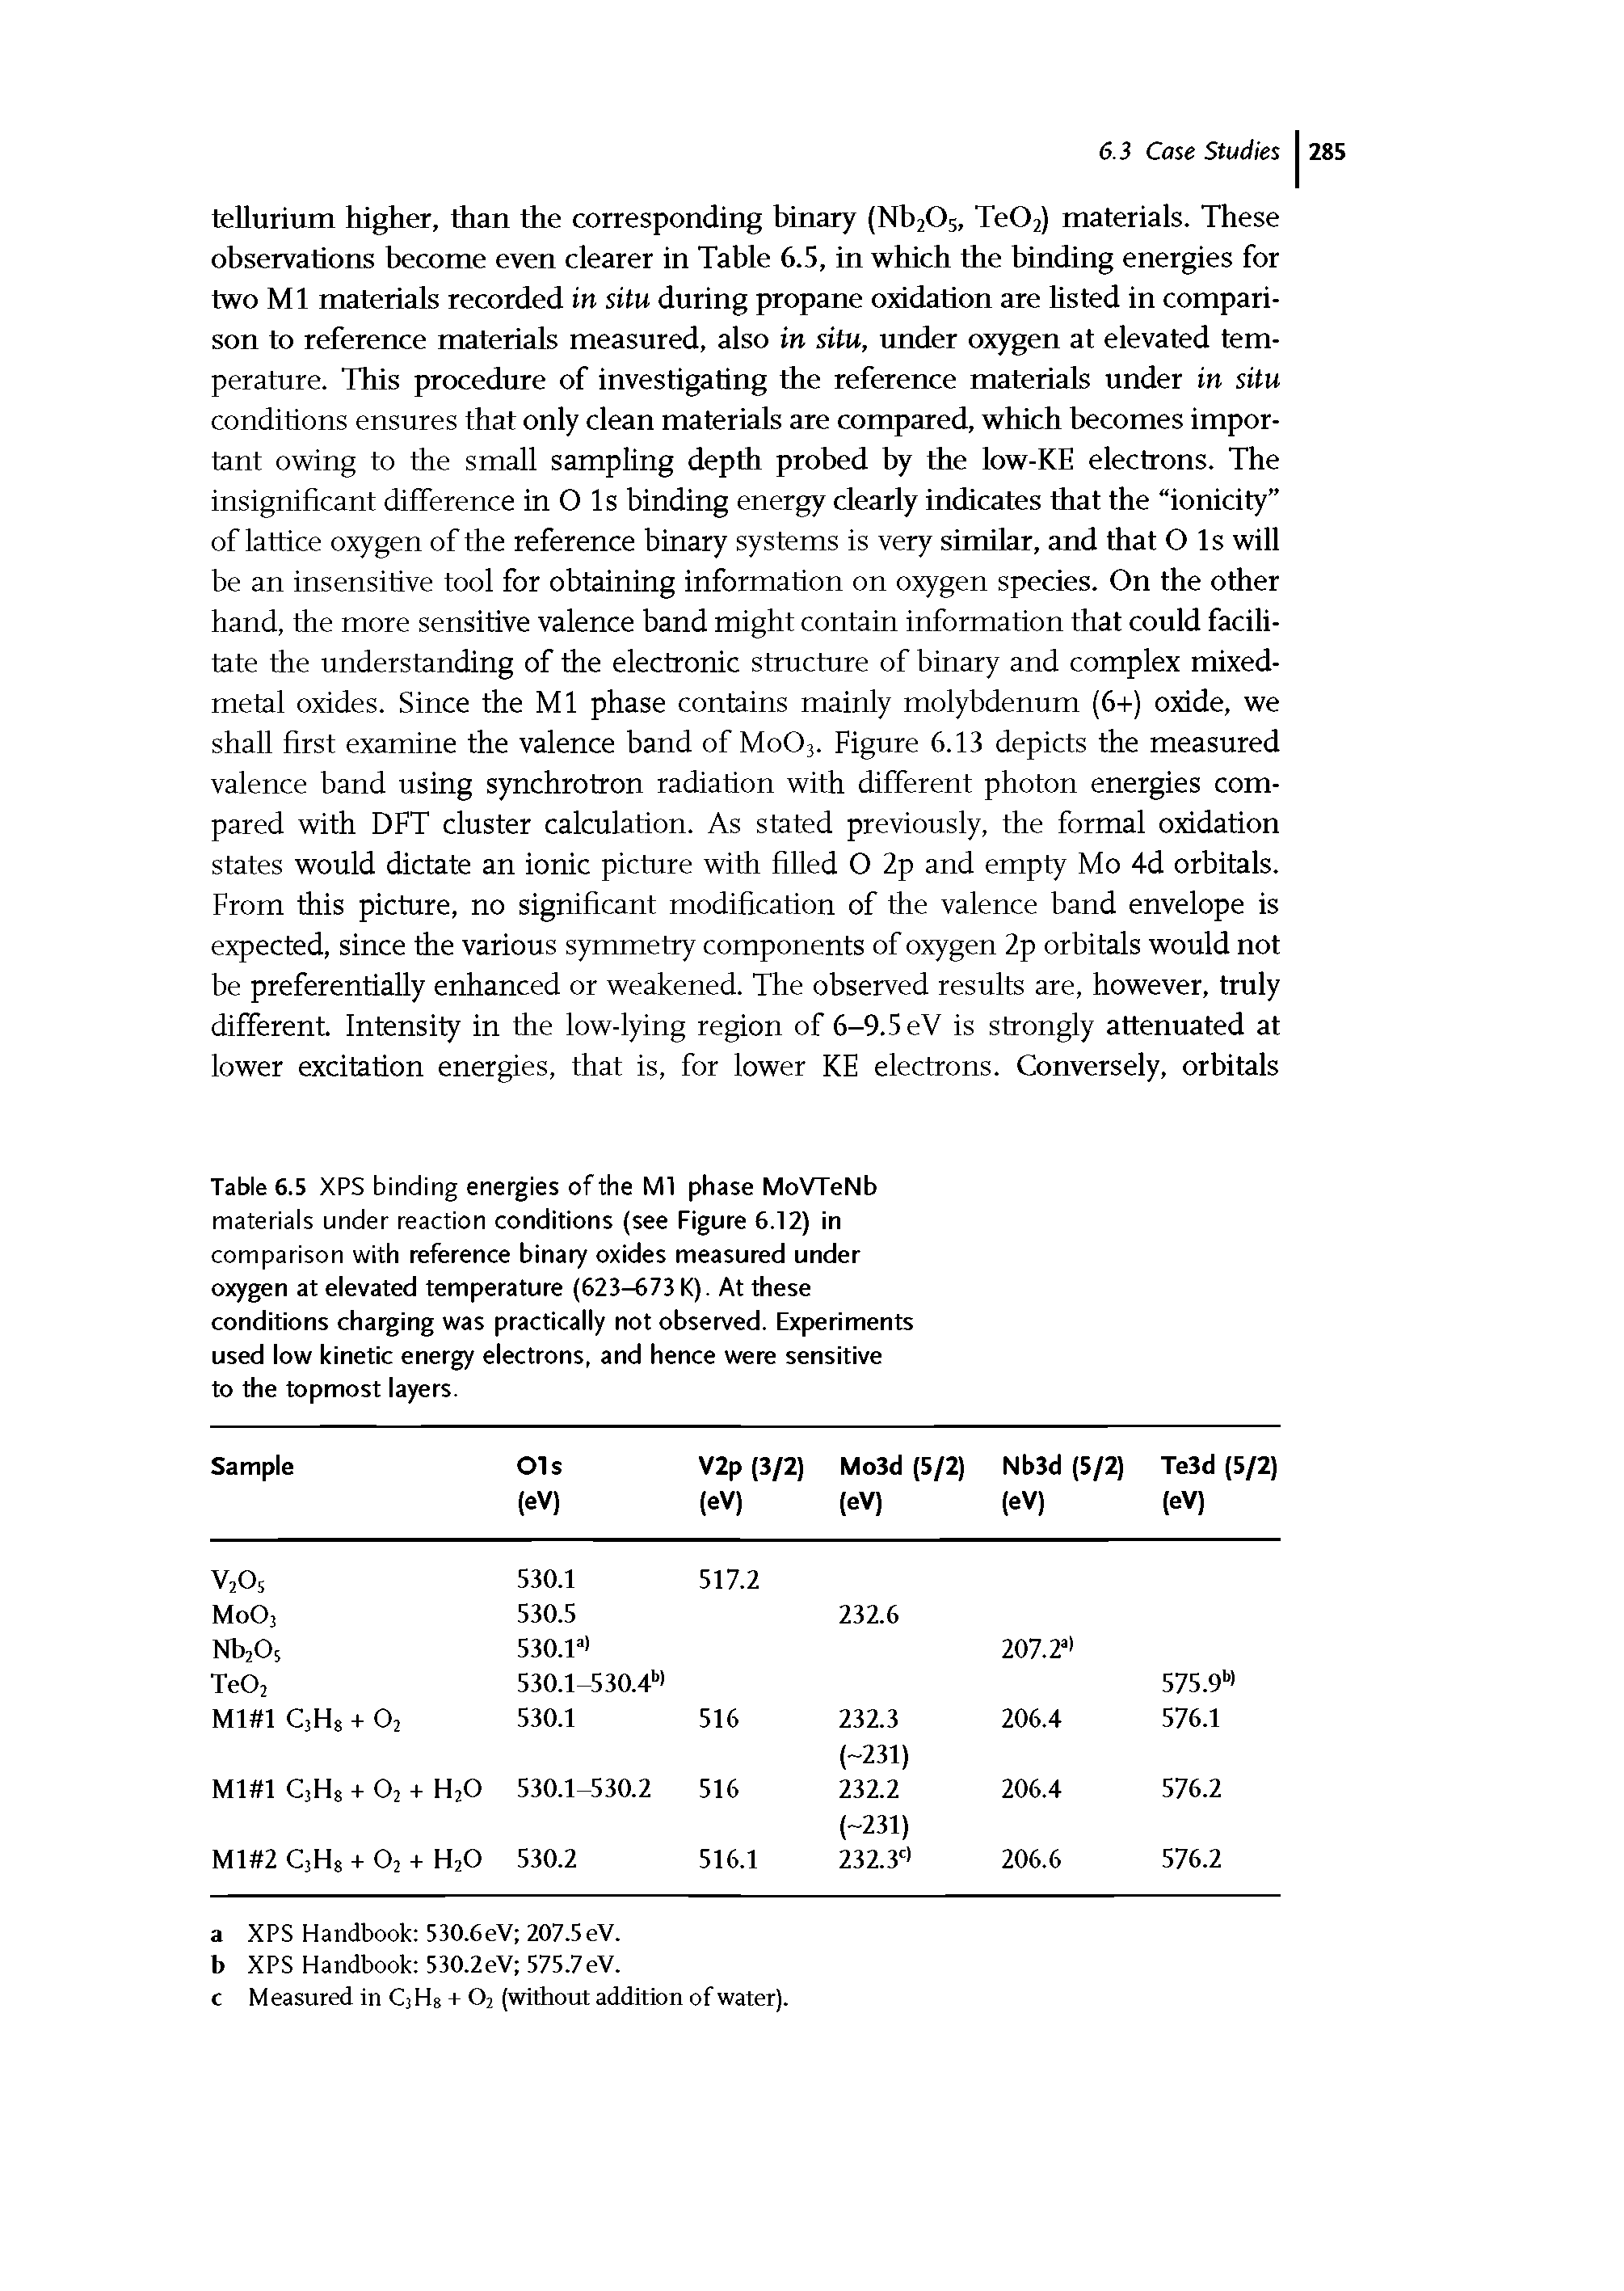 Table 6.5 XPS binding energies of the Ml phase MoVTeNb materials under reaction conditions (see Figure 6.12) in comparison with reference binary oxides measured under oxygen at elevated temperature (623-673 K). At these conditions charging was practically not observed. Experiments used low kinetic energy electrons, and hence were sensitive to the topmost layers.